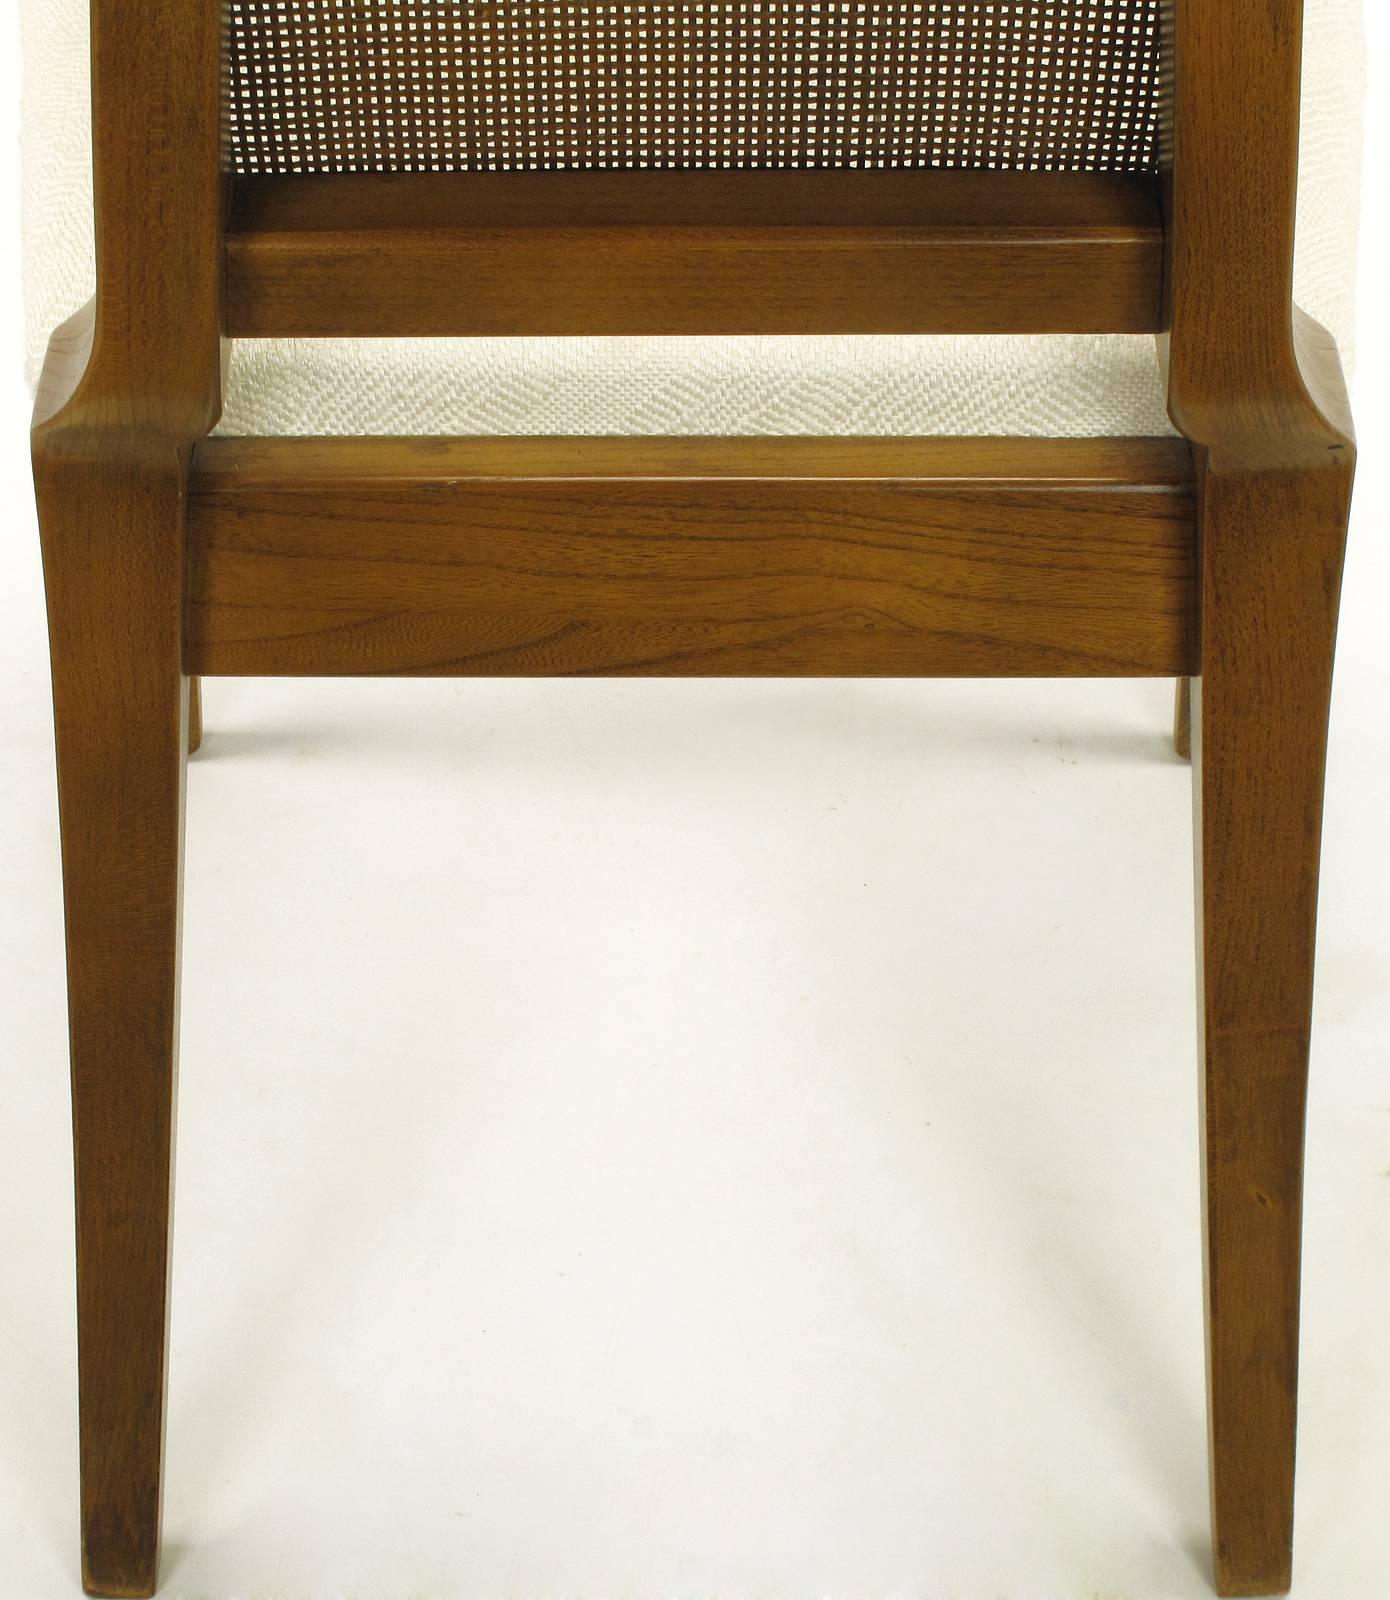 Sleek, circa 1950s Modern Walnut and Cane Dining Chairs For Sale 5